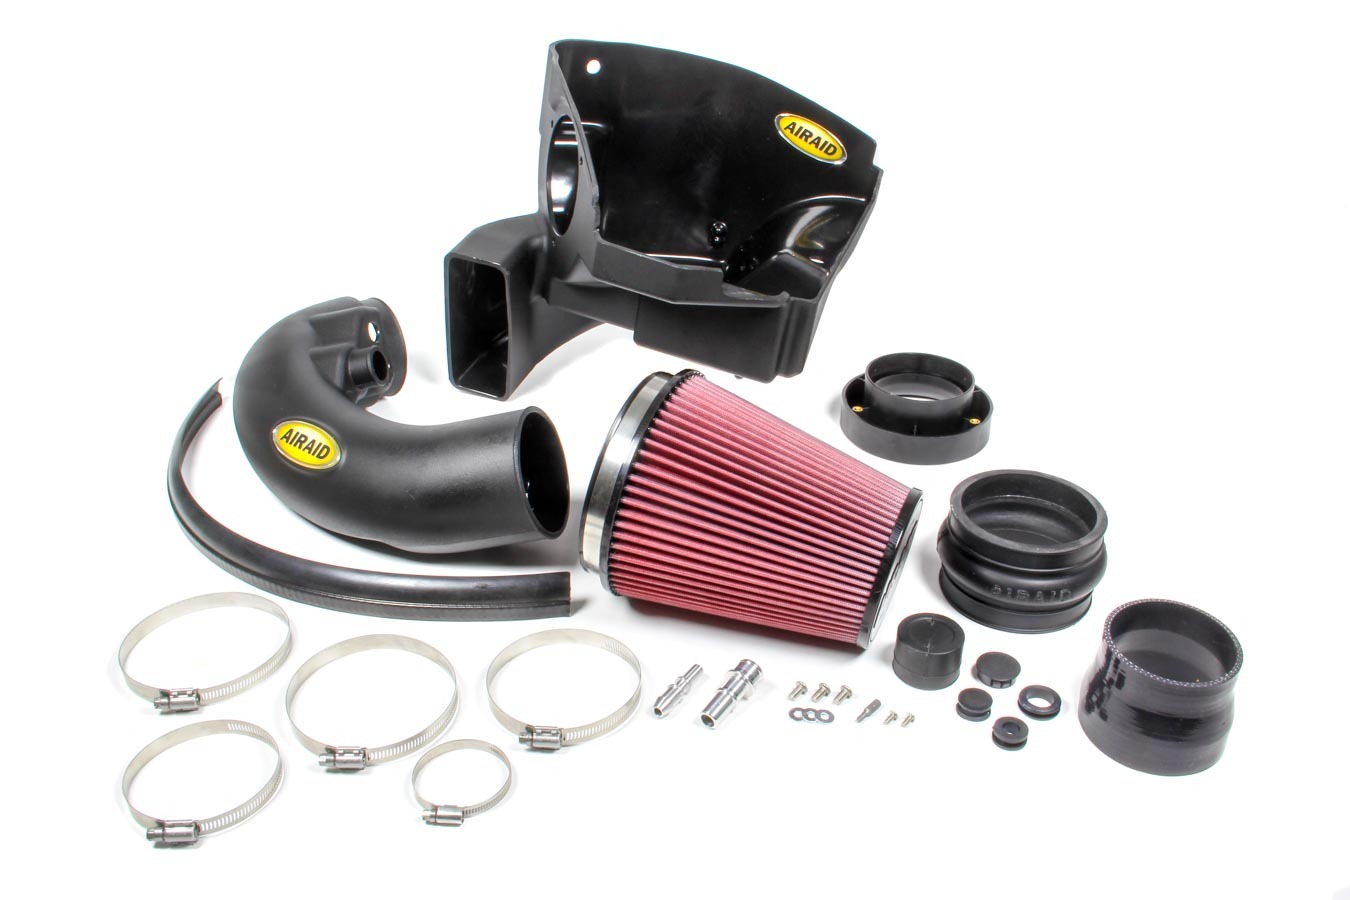 AIRAID Air Induction System, MXP, Reusable Oiled Filter, Ford Coyote, GT, Ford Mustang 2011-14, Kit